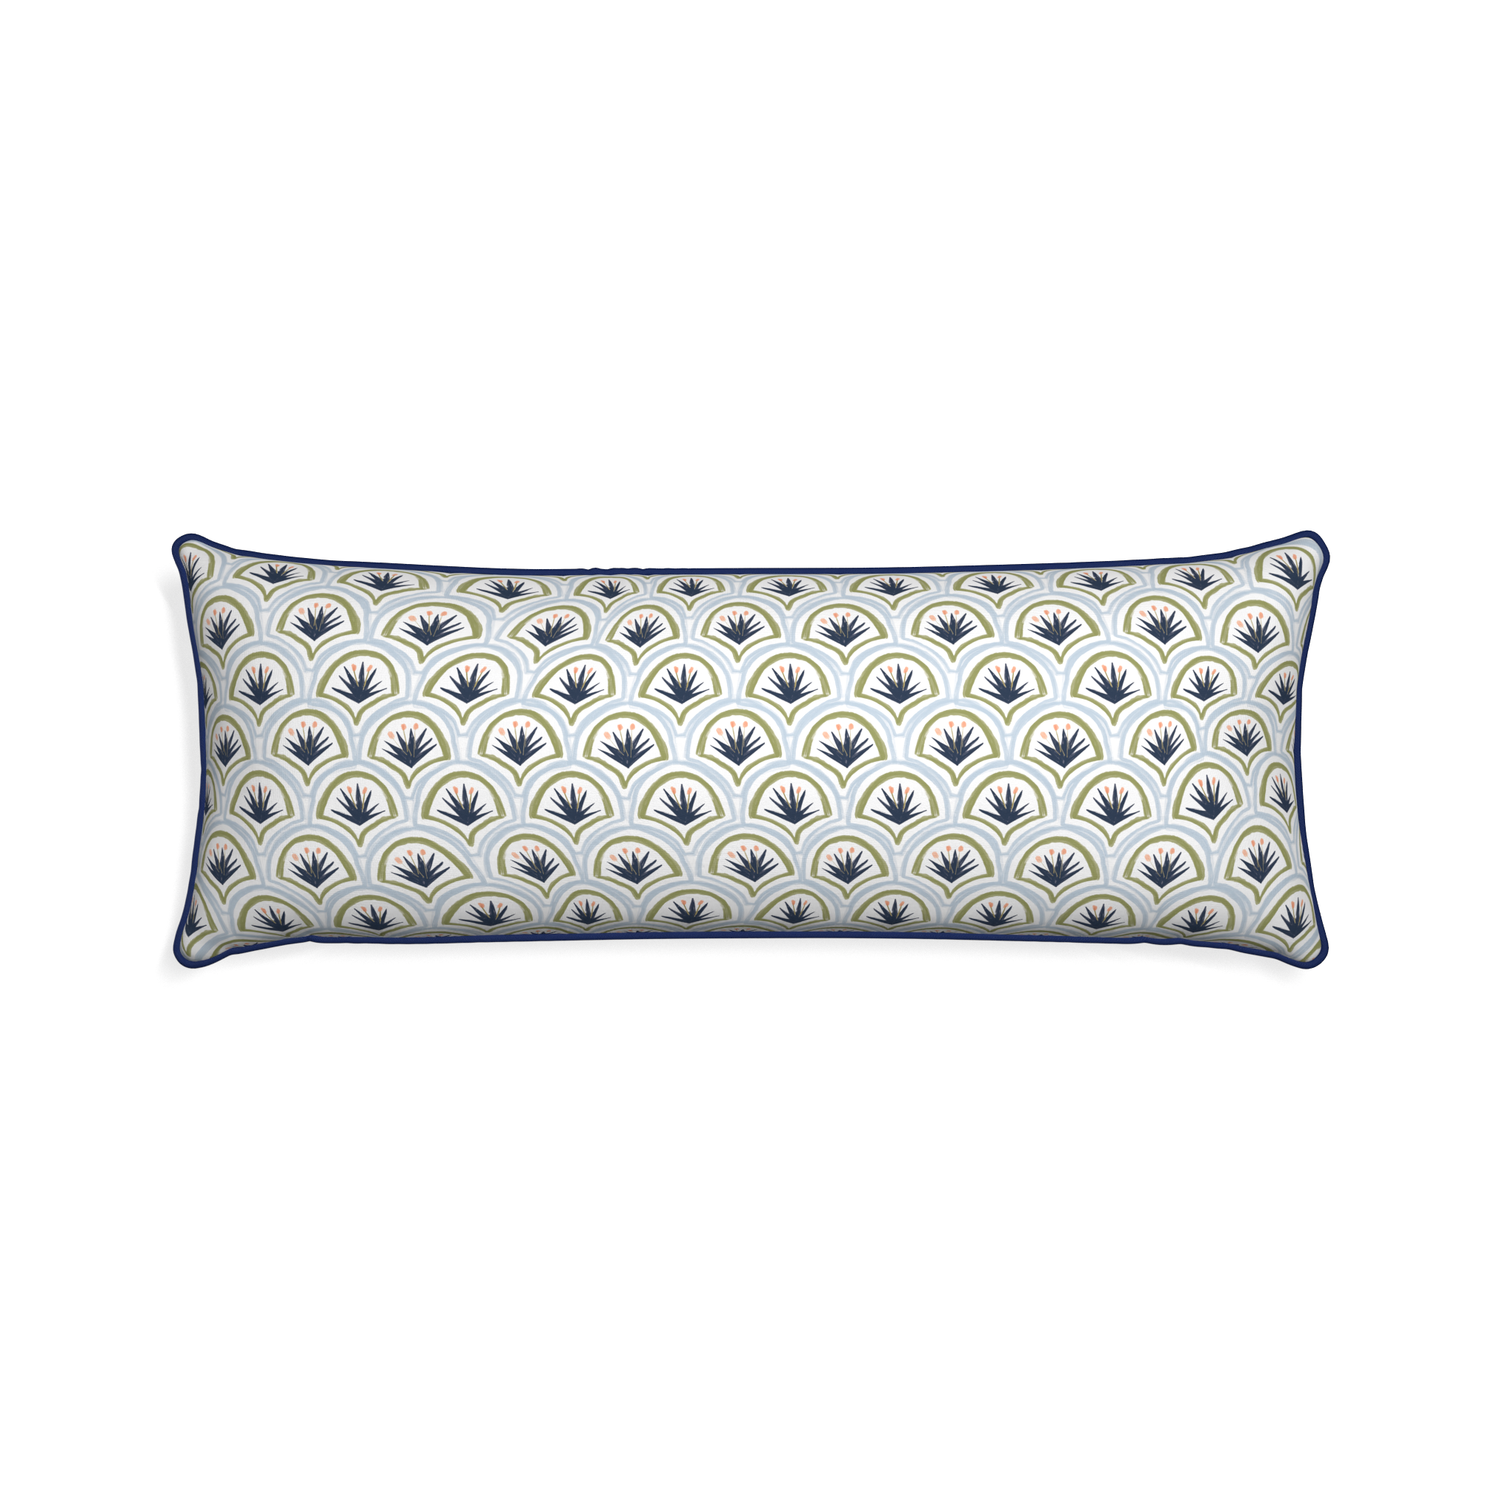 Xl-lumbar thatcher midnight custom art deco palm patternpillow with midnight piping on white background